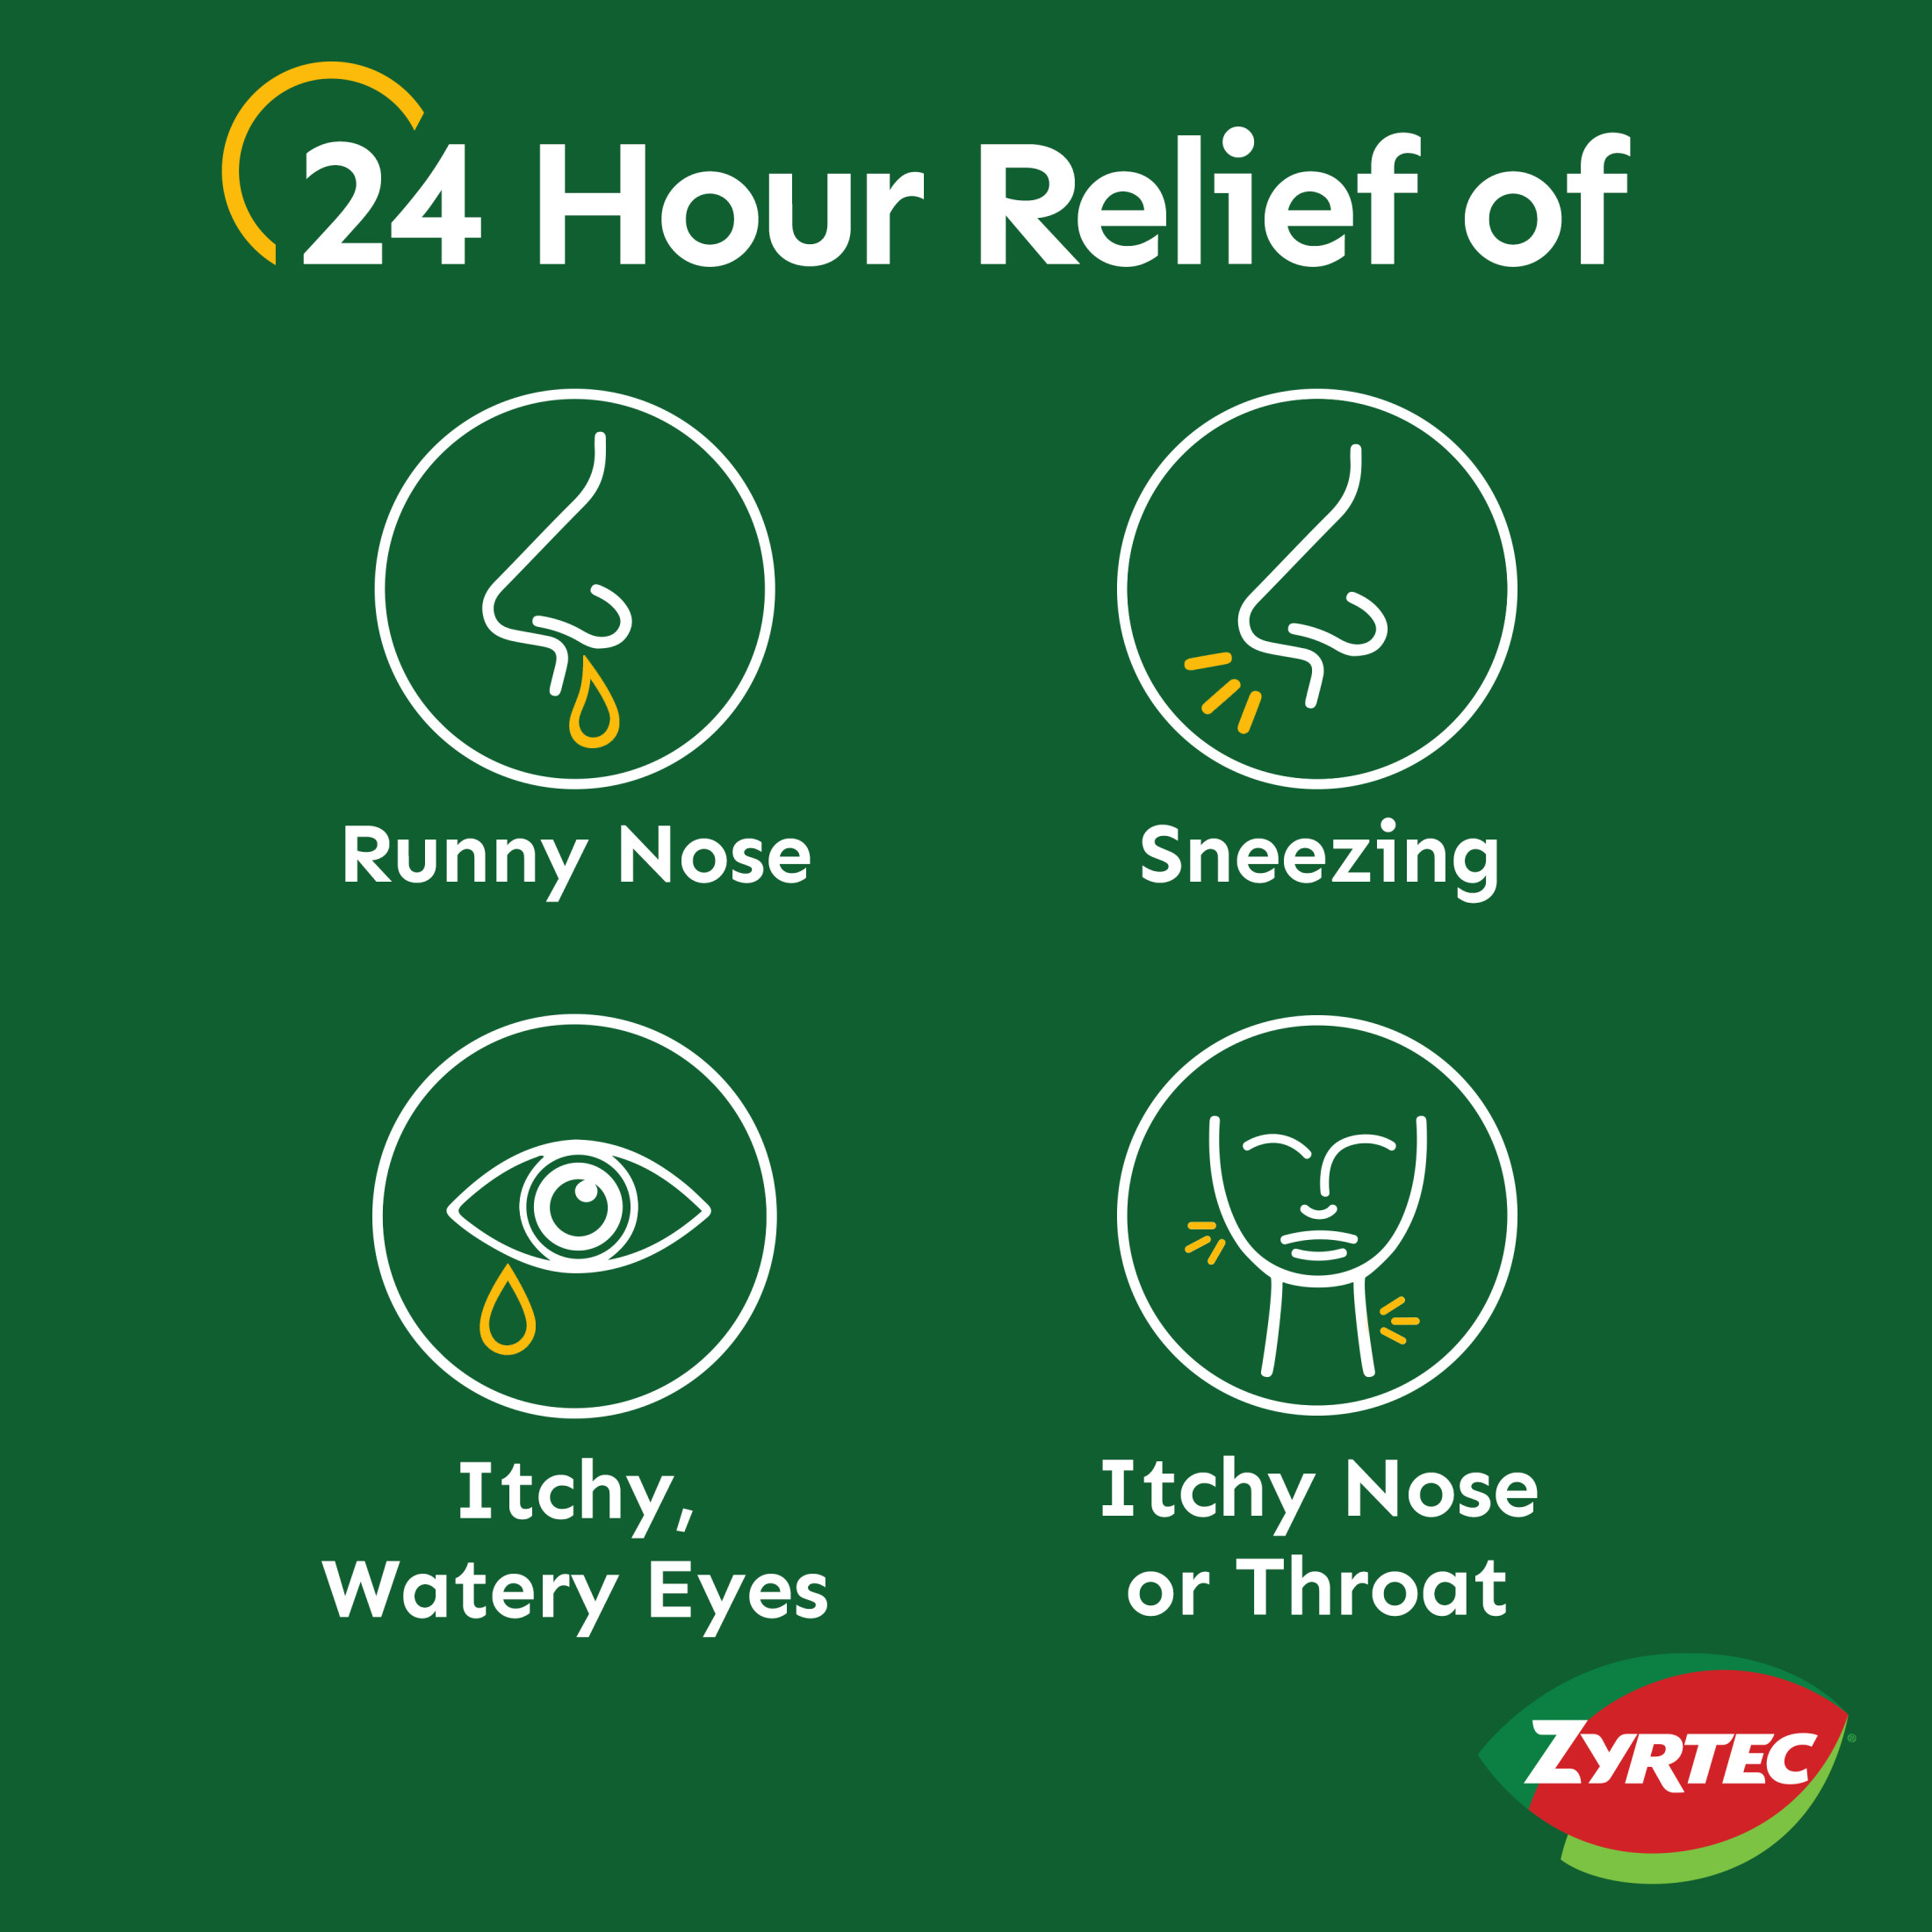 Zyrtec 24 Hour Allergy Relief Tablets, Cetirizine HCl, 14 Ct, (14 x 1 Ct) - image 3 of 8